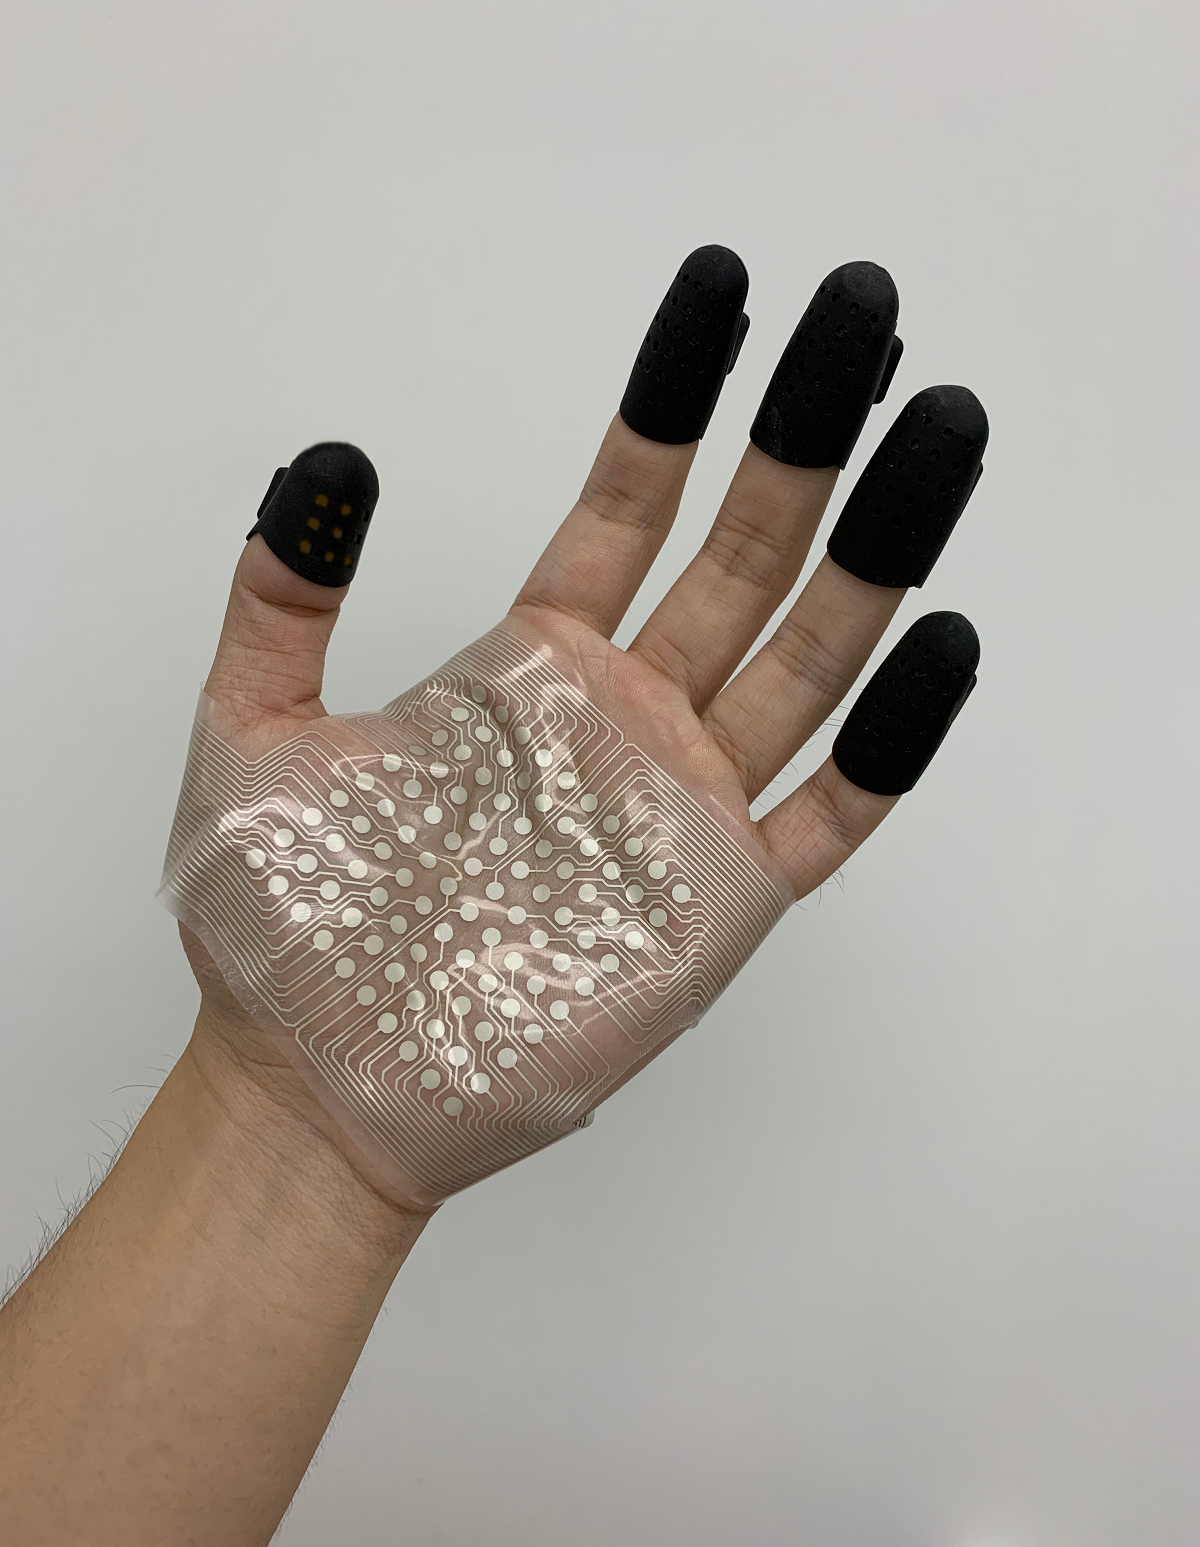 wearable tactile rendering system 